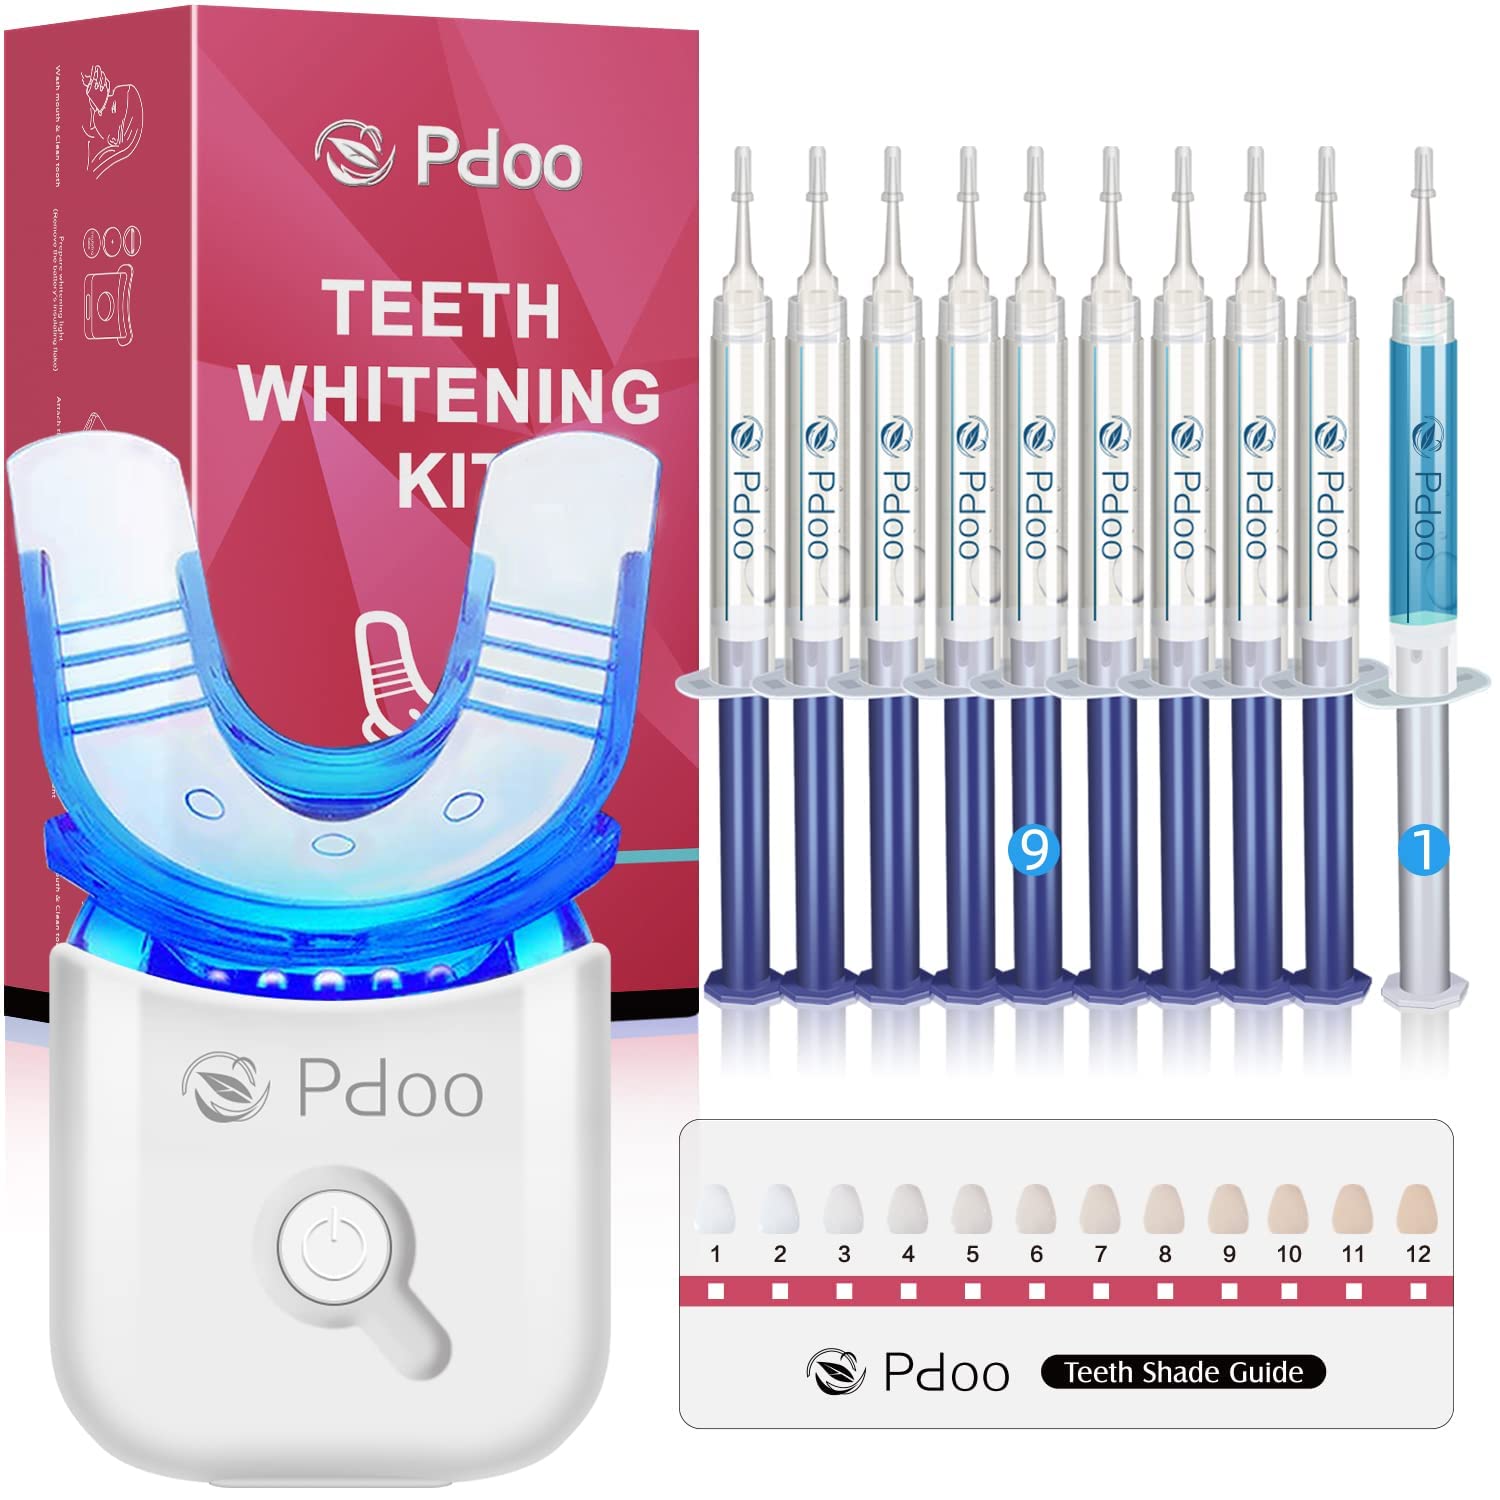 Pdoo Teeth Whitening Kit with LED Lights Tray for Sensitive Teeth, 10x Whitening Pen Gel, Teeth Whitener at Home, Pain Free and Ename